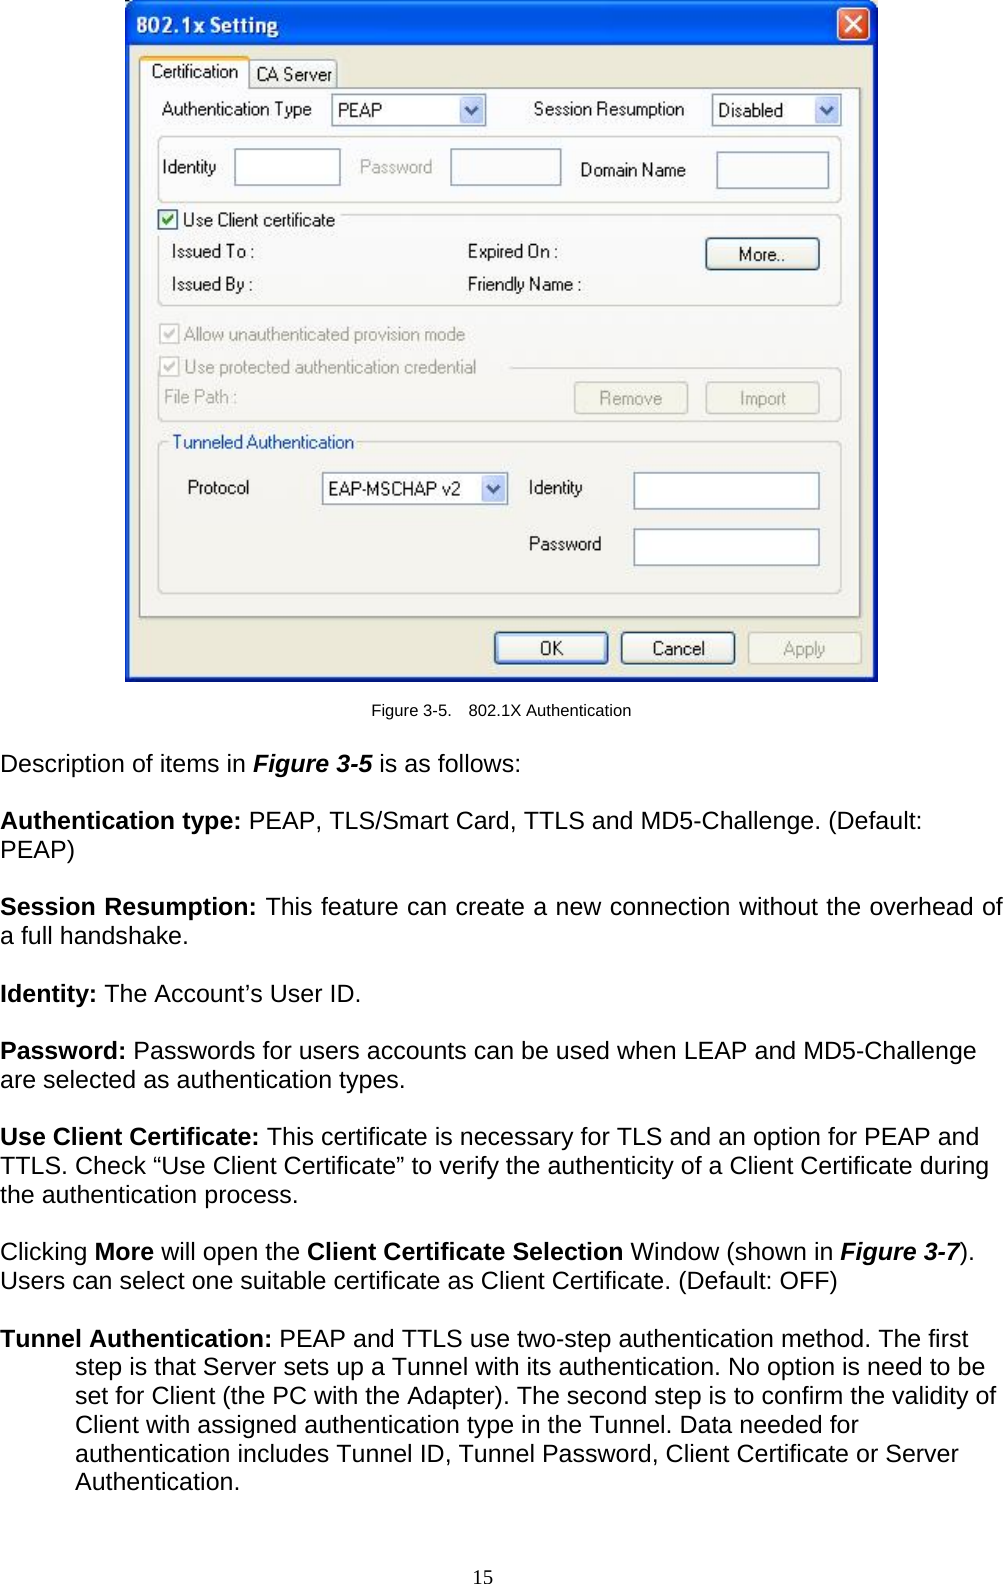 15     Figure 3-5.  802.1X Authentication  Description of items in Figure 3-5 is as follows:  Authentication type: PEAP, TLS/Smart Card, TTLS and MD5-Challenge. (Default: PEAP)  Session Resumption: This feature can create a new connection without the overhead of a full handshake.  Identity: The Account’s User ID.  Password: Passwords for users accounts can be used when LEAP and MD5-Challenge are selected as authentication types.  Use Client Certificate: This certificate is necessary for TLS and an option for PEAP and TTLS. Check “Use Client Certificate” to verify the authenticity of a Client Certificate during the authentication process.    Clicking More will open the Client Certificate Selection Window (shown in Figure 3-7). Users can select one suitable certificate as Client Certificate. (Default: OFF)  Tunnel Authentication: PEAP and TTLS use two-step authentication method. The first step is that Server sets up a Tunnel with its authentication. No option is need to be set for Client (the PC with the Adapter). The second step is to confirm the validity of Client with assigned authentication type in the Tunnel. Data needed for authentication includes Tunnel ID, Tunnel Password, Client Certificate or Server Authentication.  